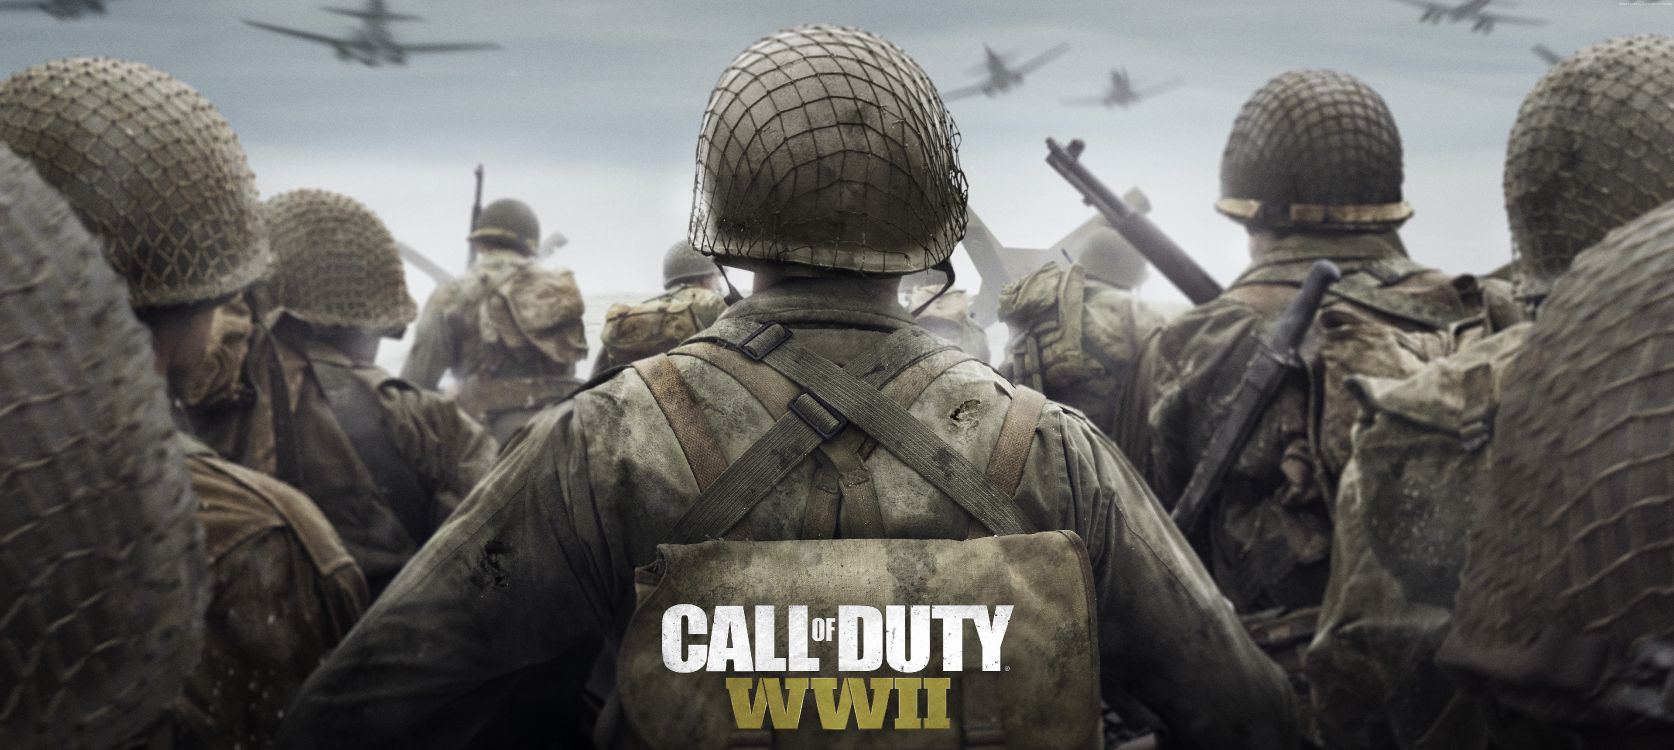 Call of Duty Ww2, Call of Duty WWII, Activision, Sledgehammer Games, Soldat. Wallpaper in 7190x3220 Resolution